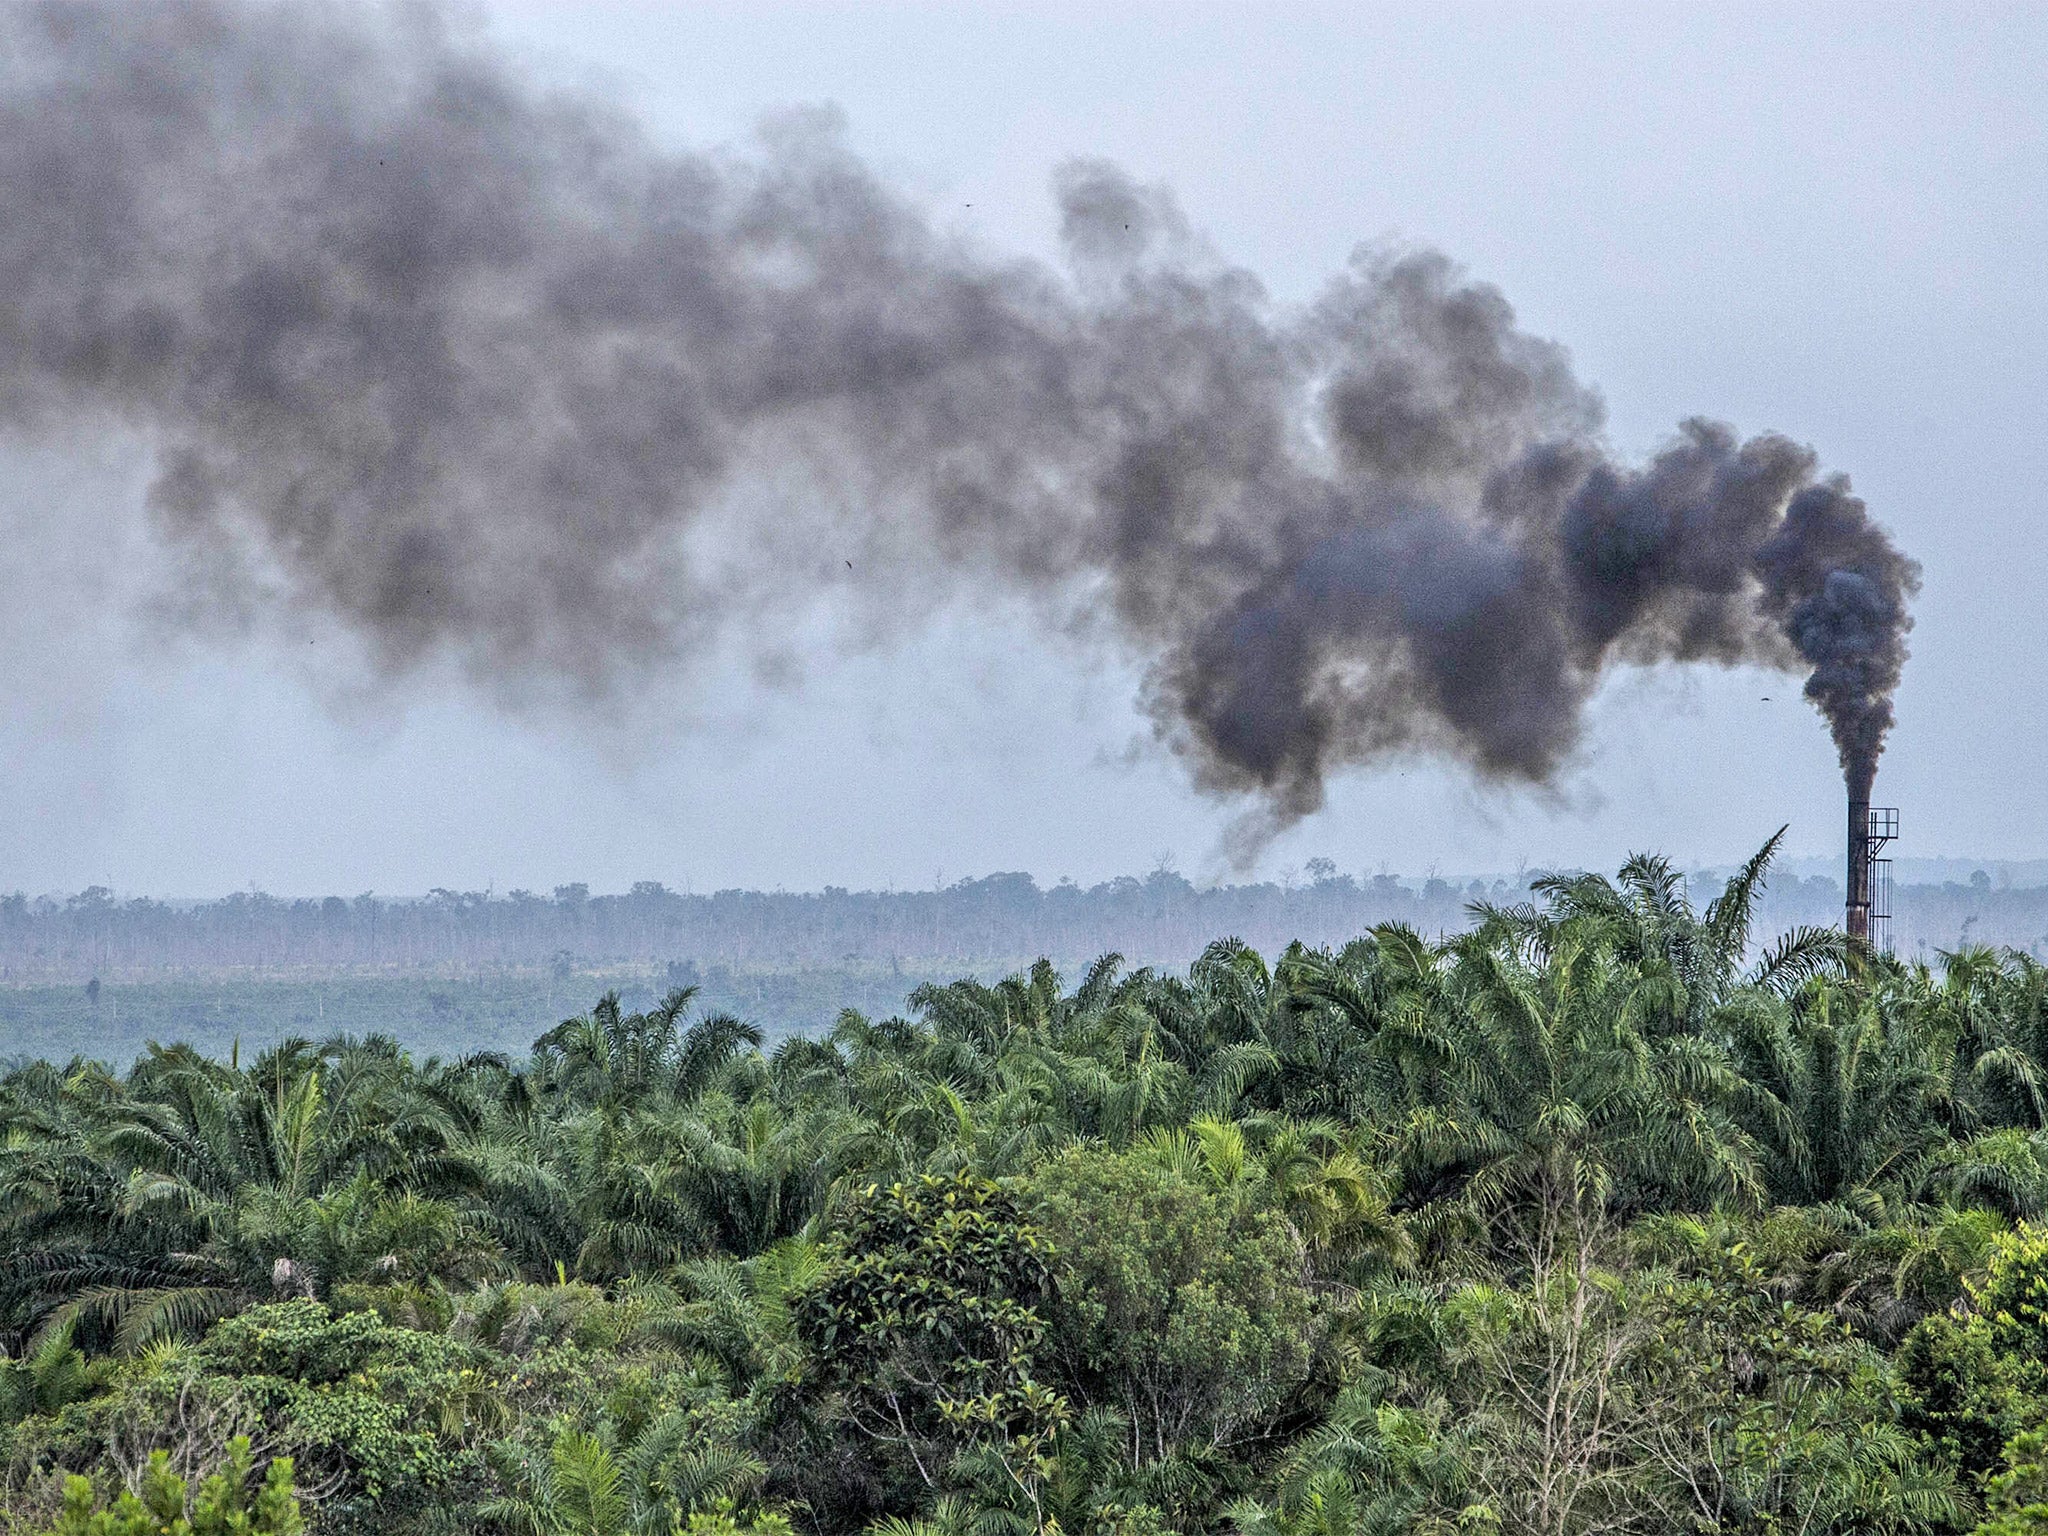 The expansion of palm oil plantations in Indonesia has increased greenhouse gas emissions